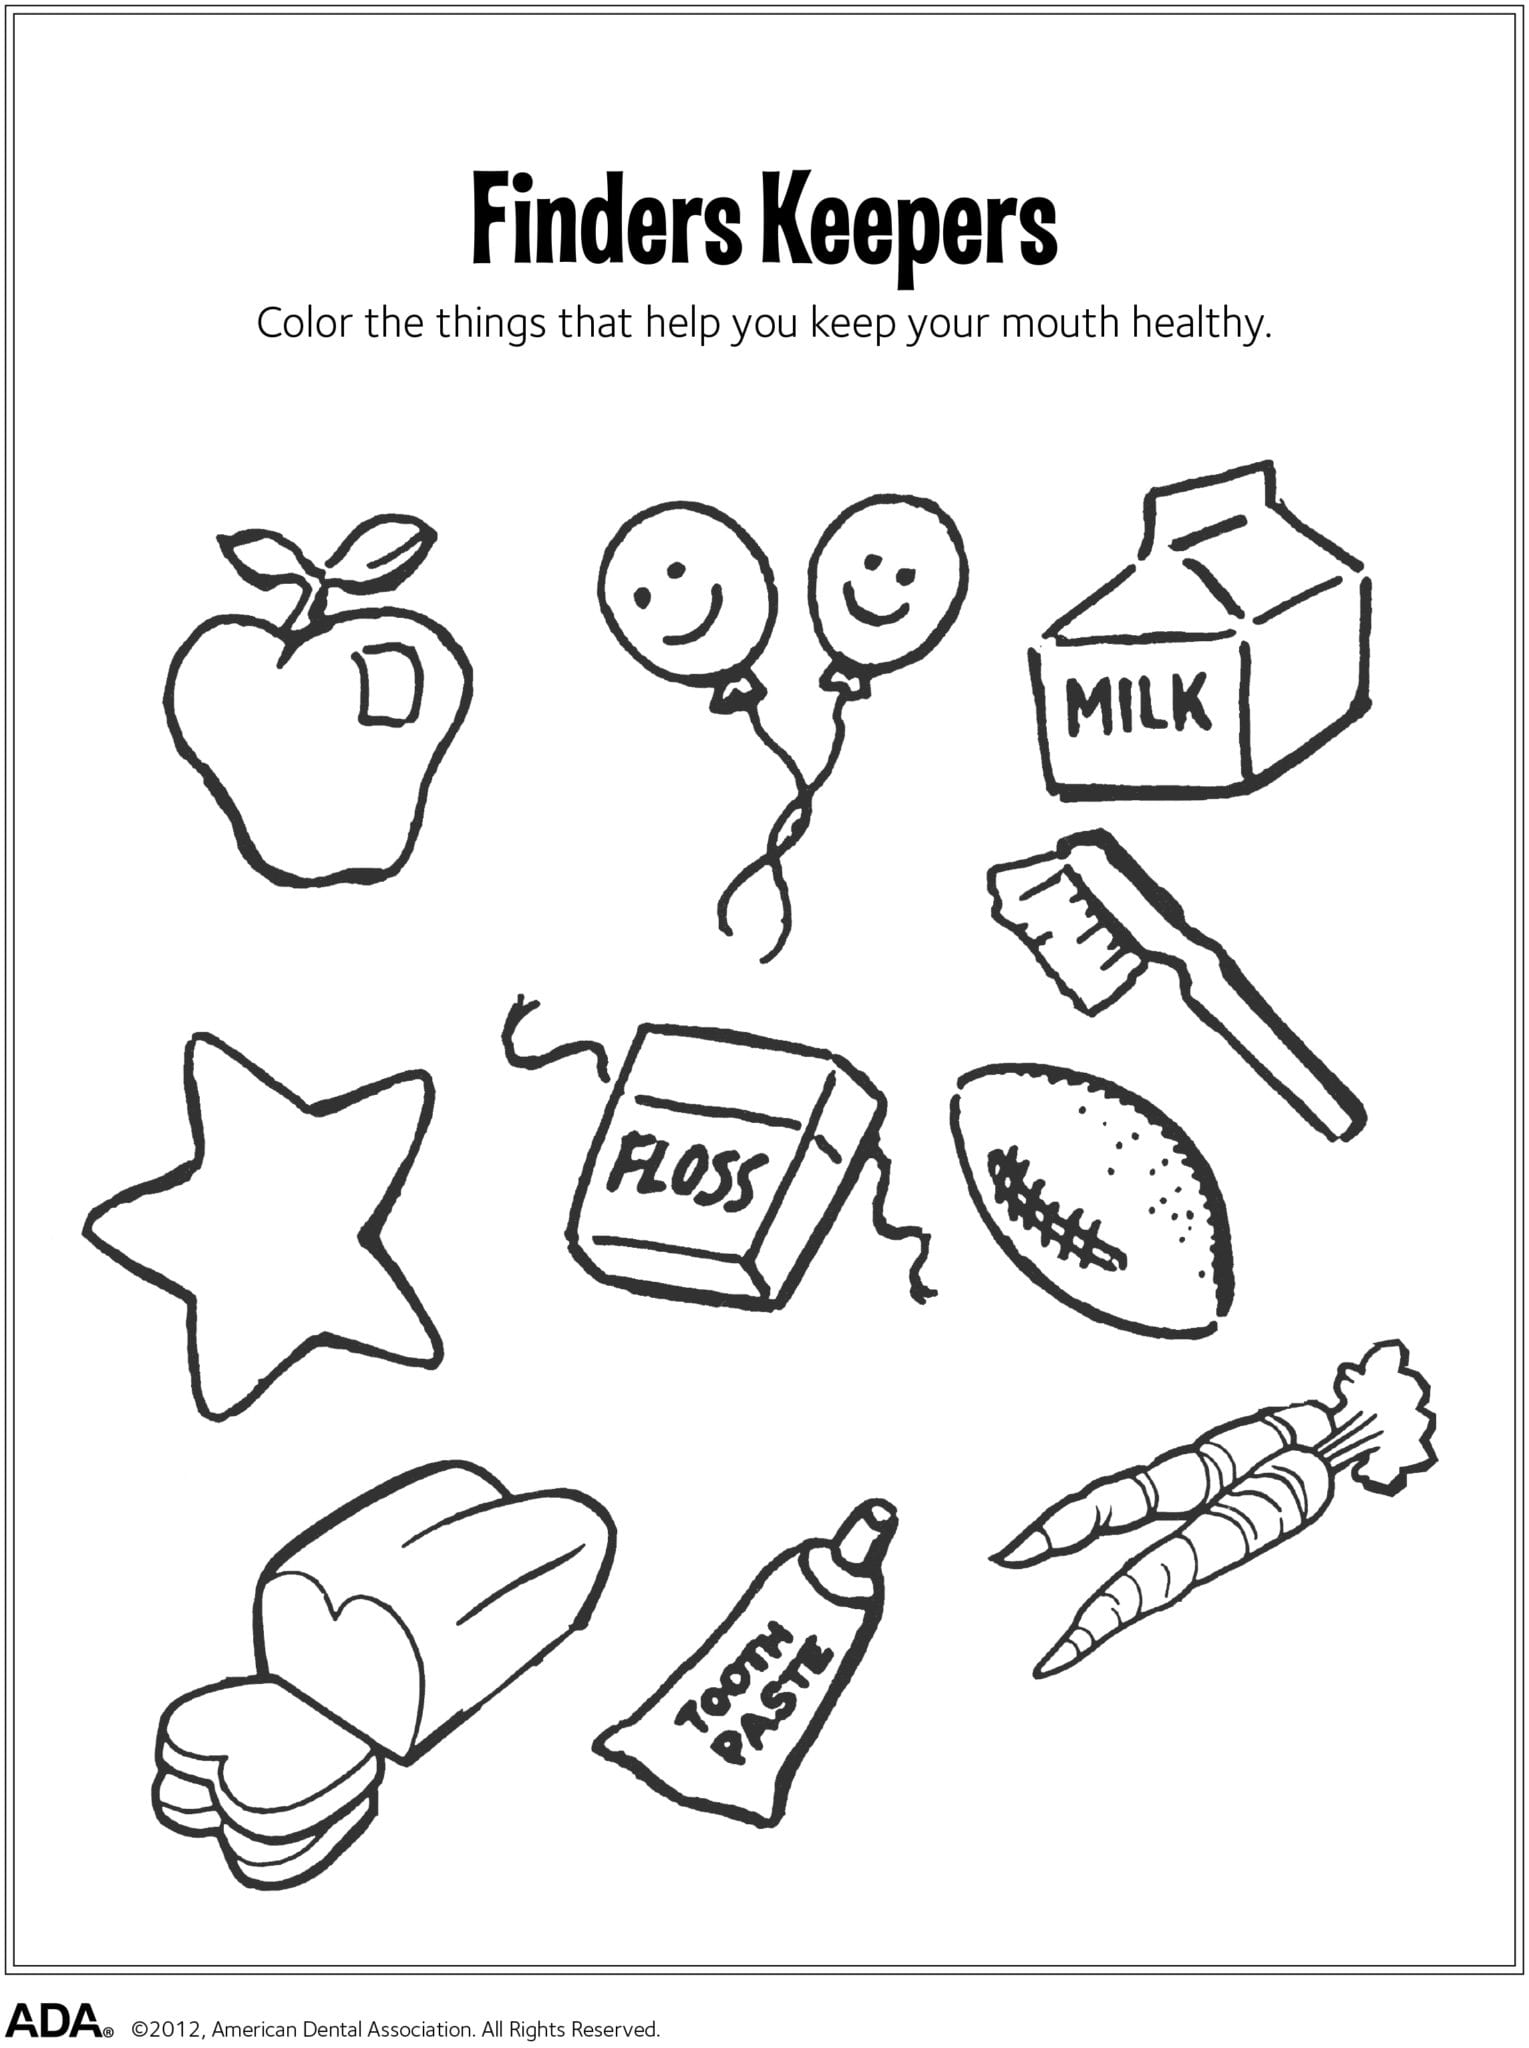 printable coloring page game to help indentify oral health aids